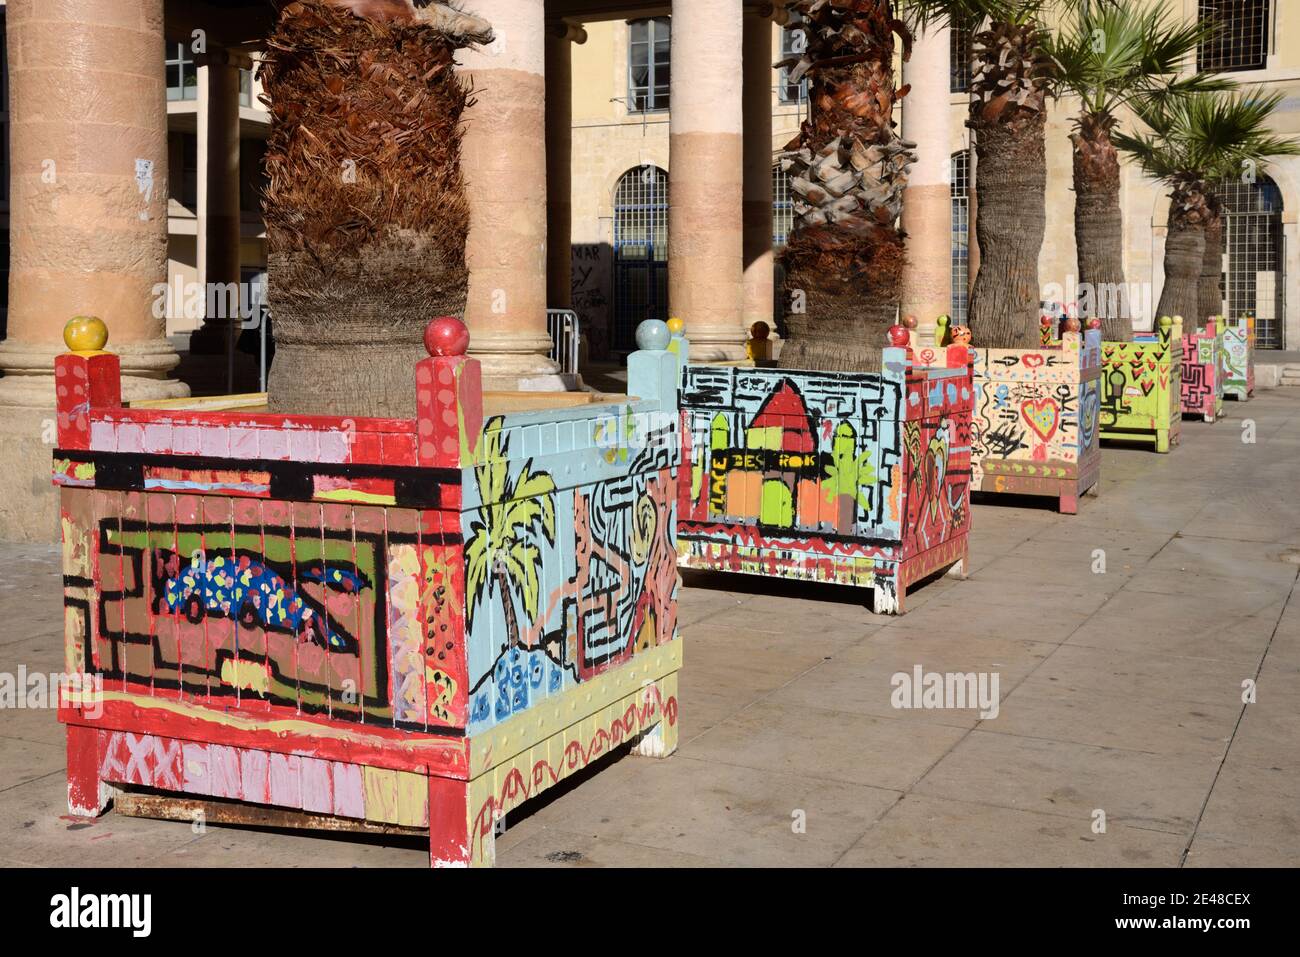 Colourful Wooden Planters Decorated with Grafitti Designs in front of the Columns of the Halle Puget Market Building (1672) Marseille France Stock Photo